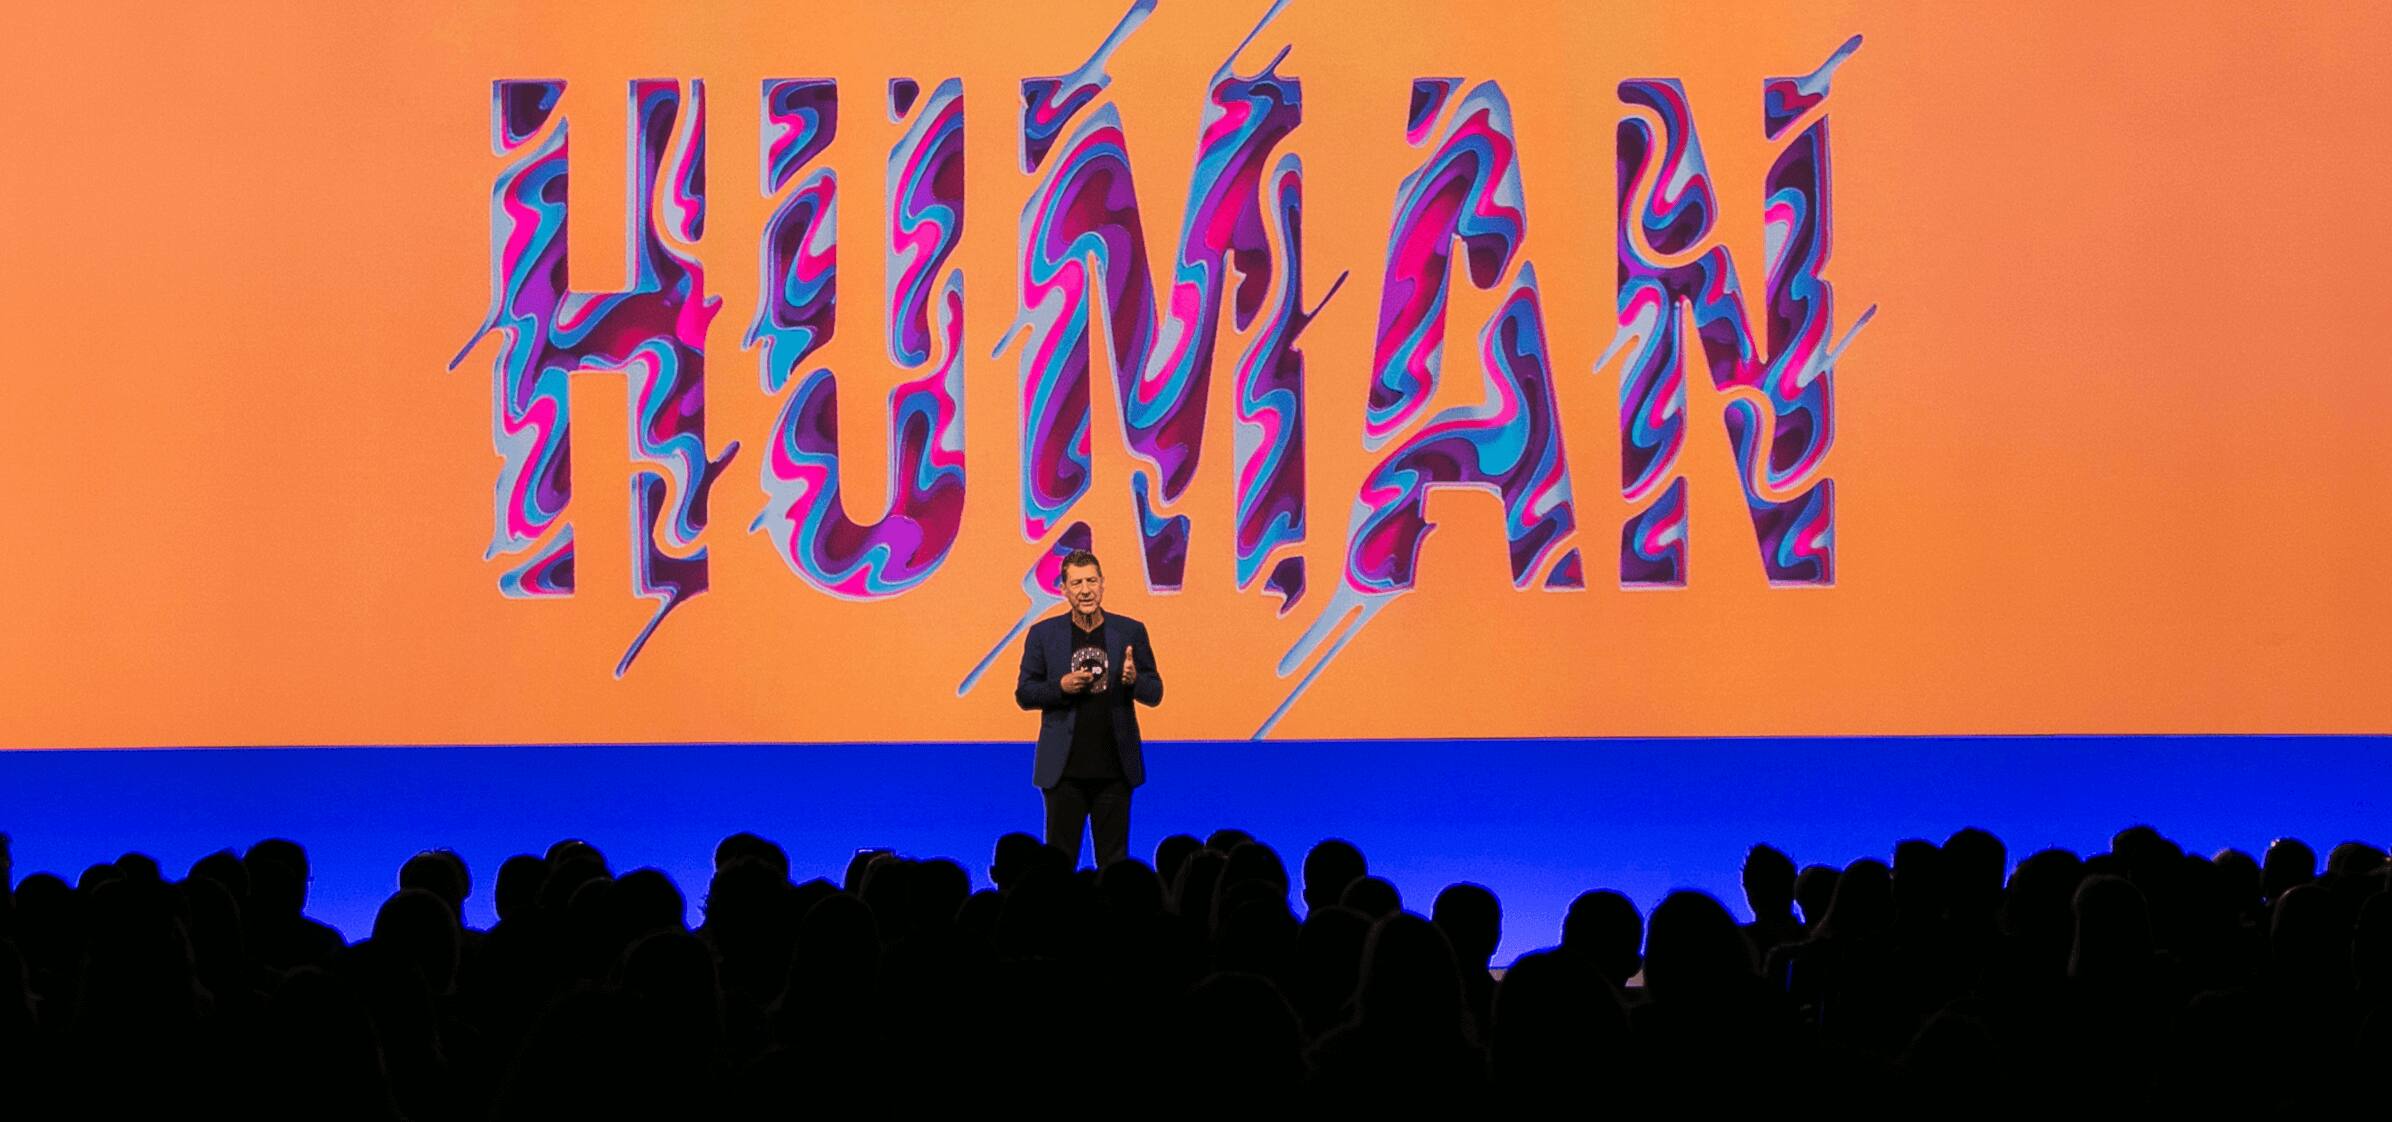 Xero CEO Steve Vamos talks to a large audience with a background displaying the word ‘Human’ in large pink letters behind him